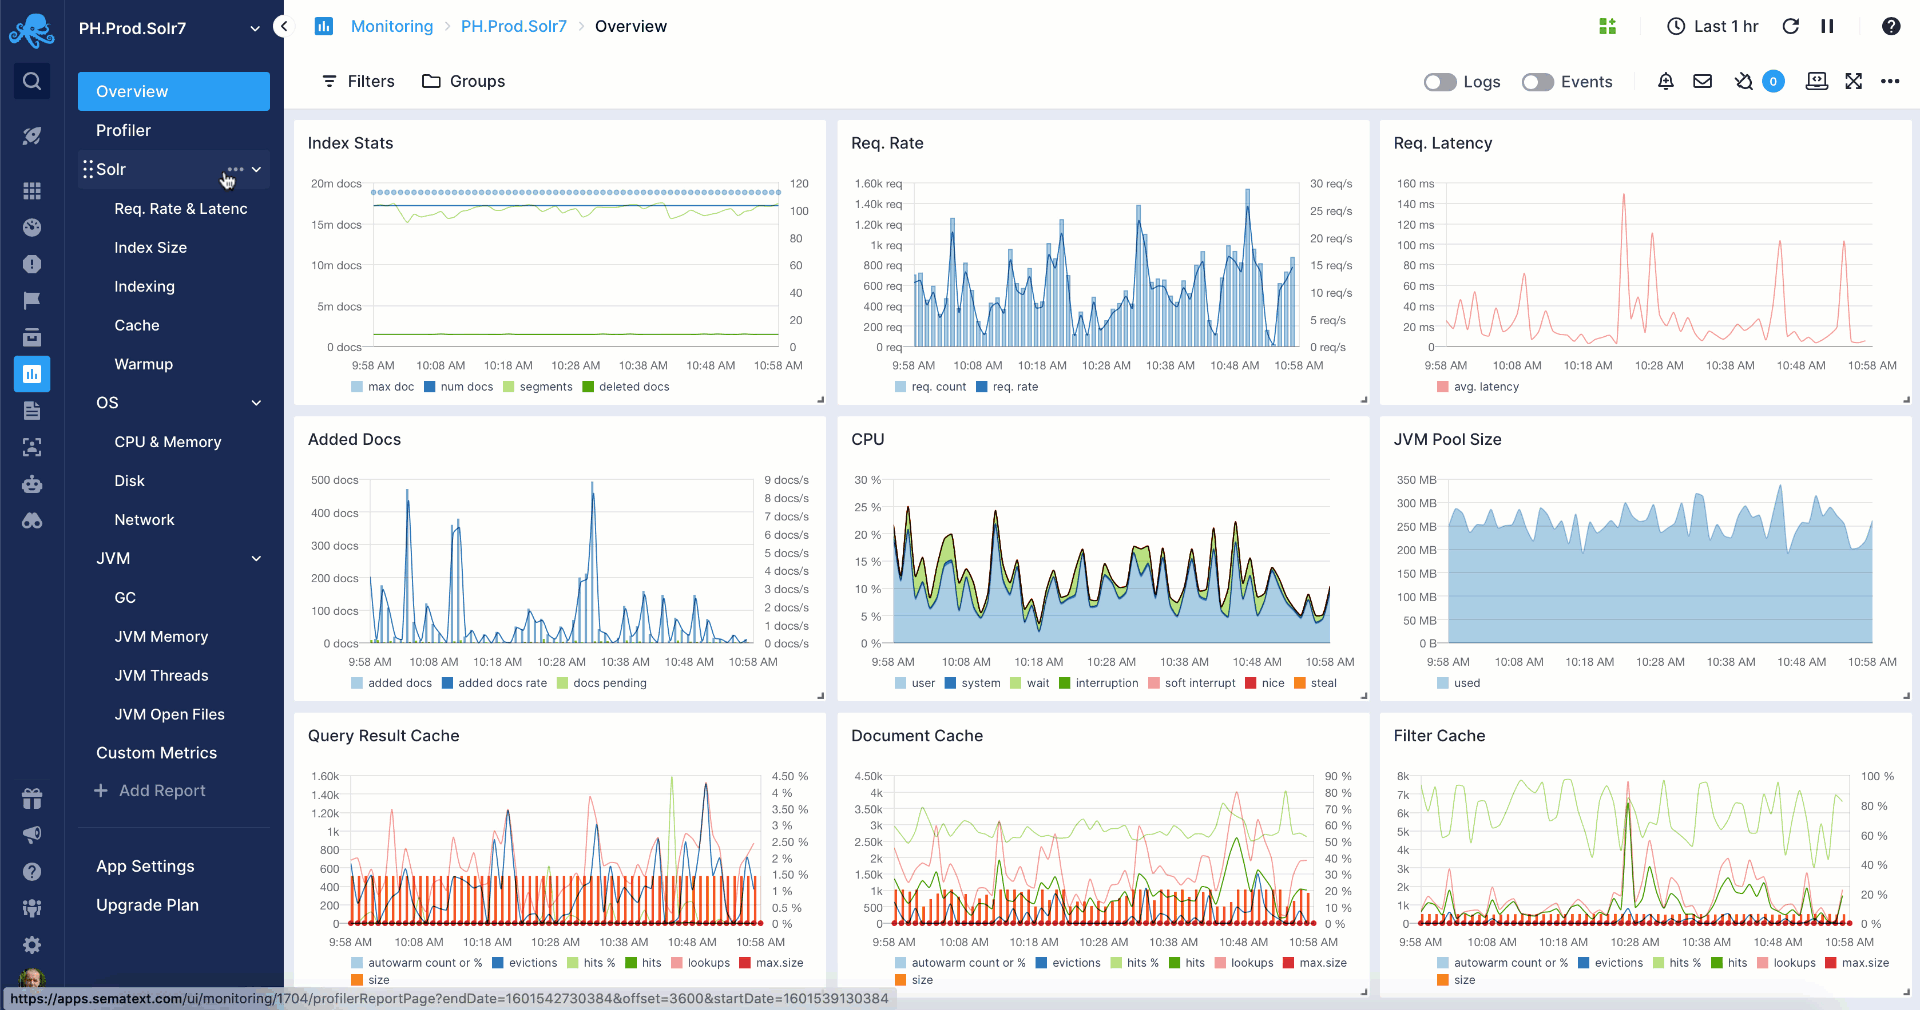 Monitor Your Solr & SolrCloud in Real-Time